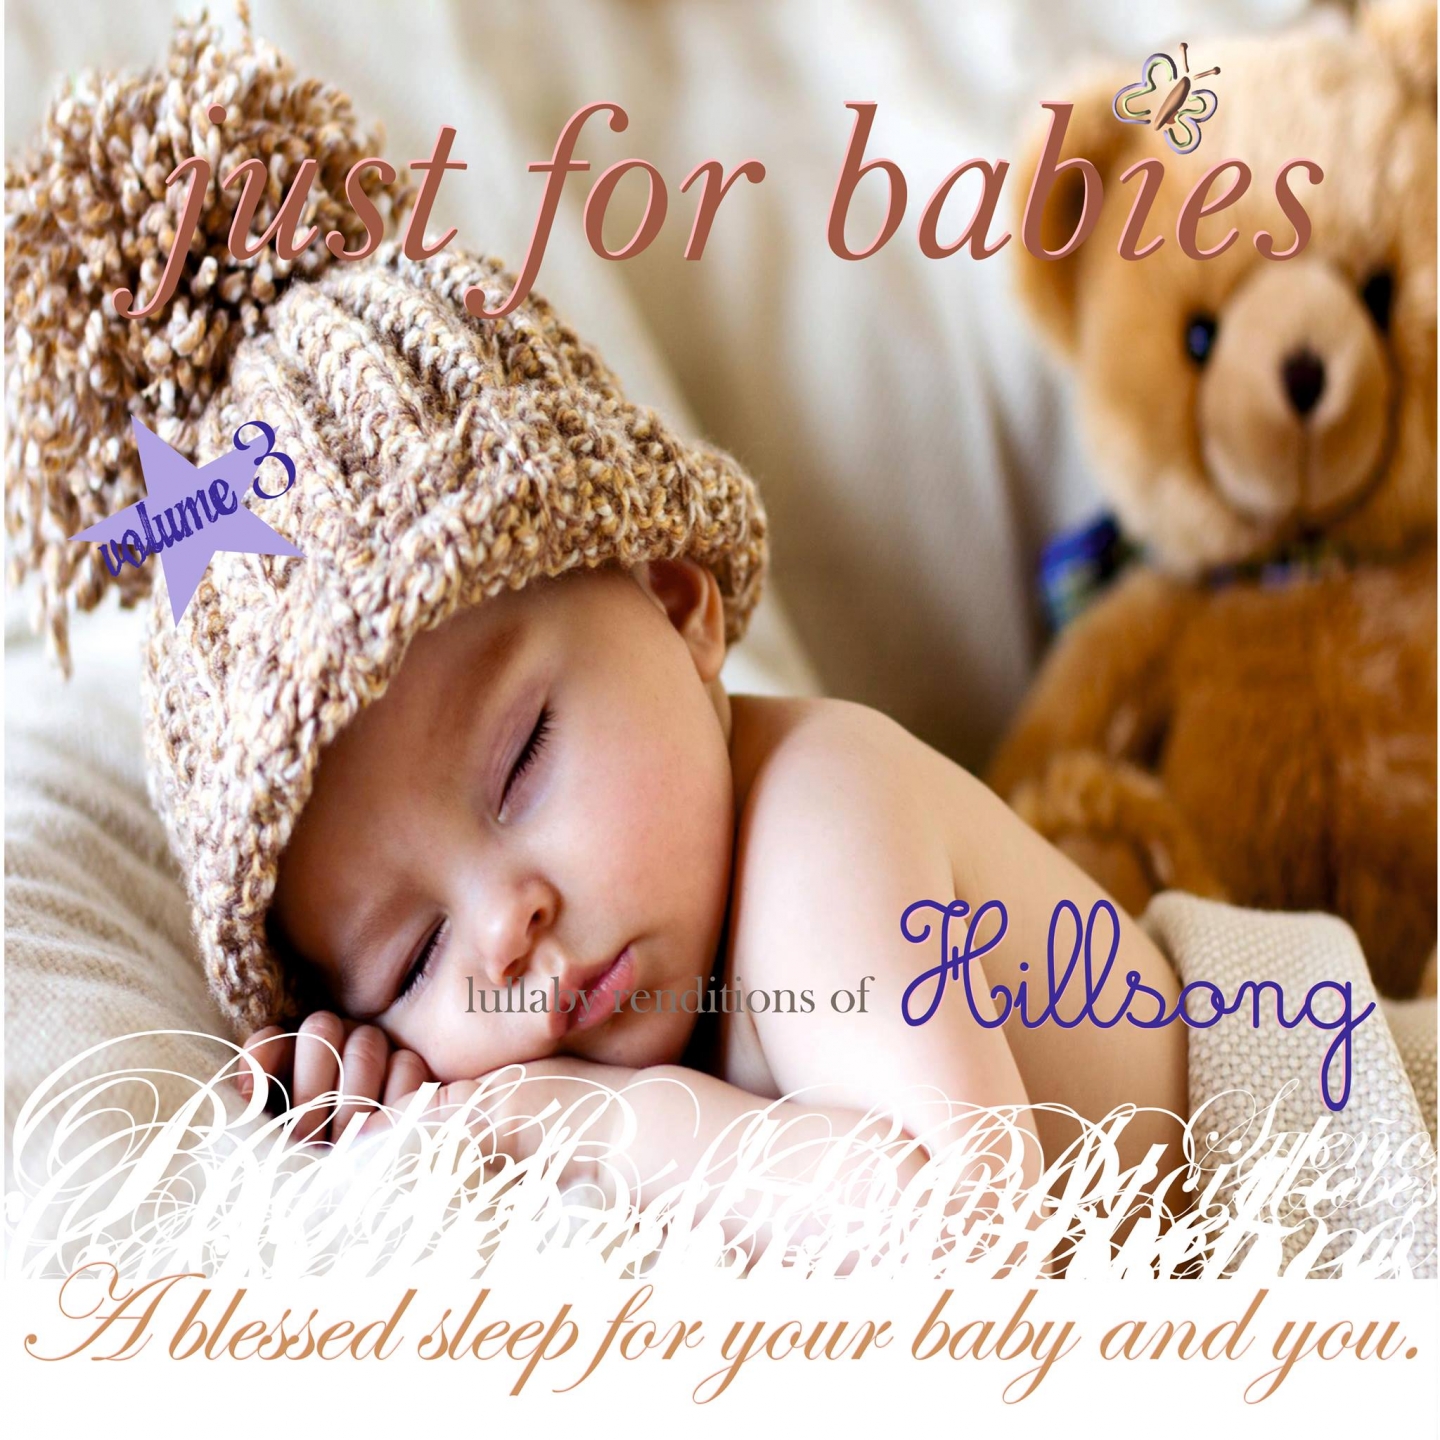 Just for Babies: Lullaby Renditions of Hillsong, Vol. 3 (A Blessed Sleep for Your Baby and You)